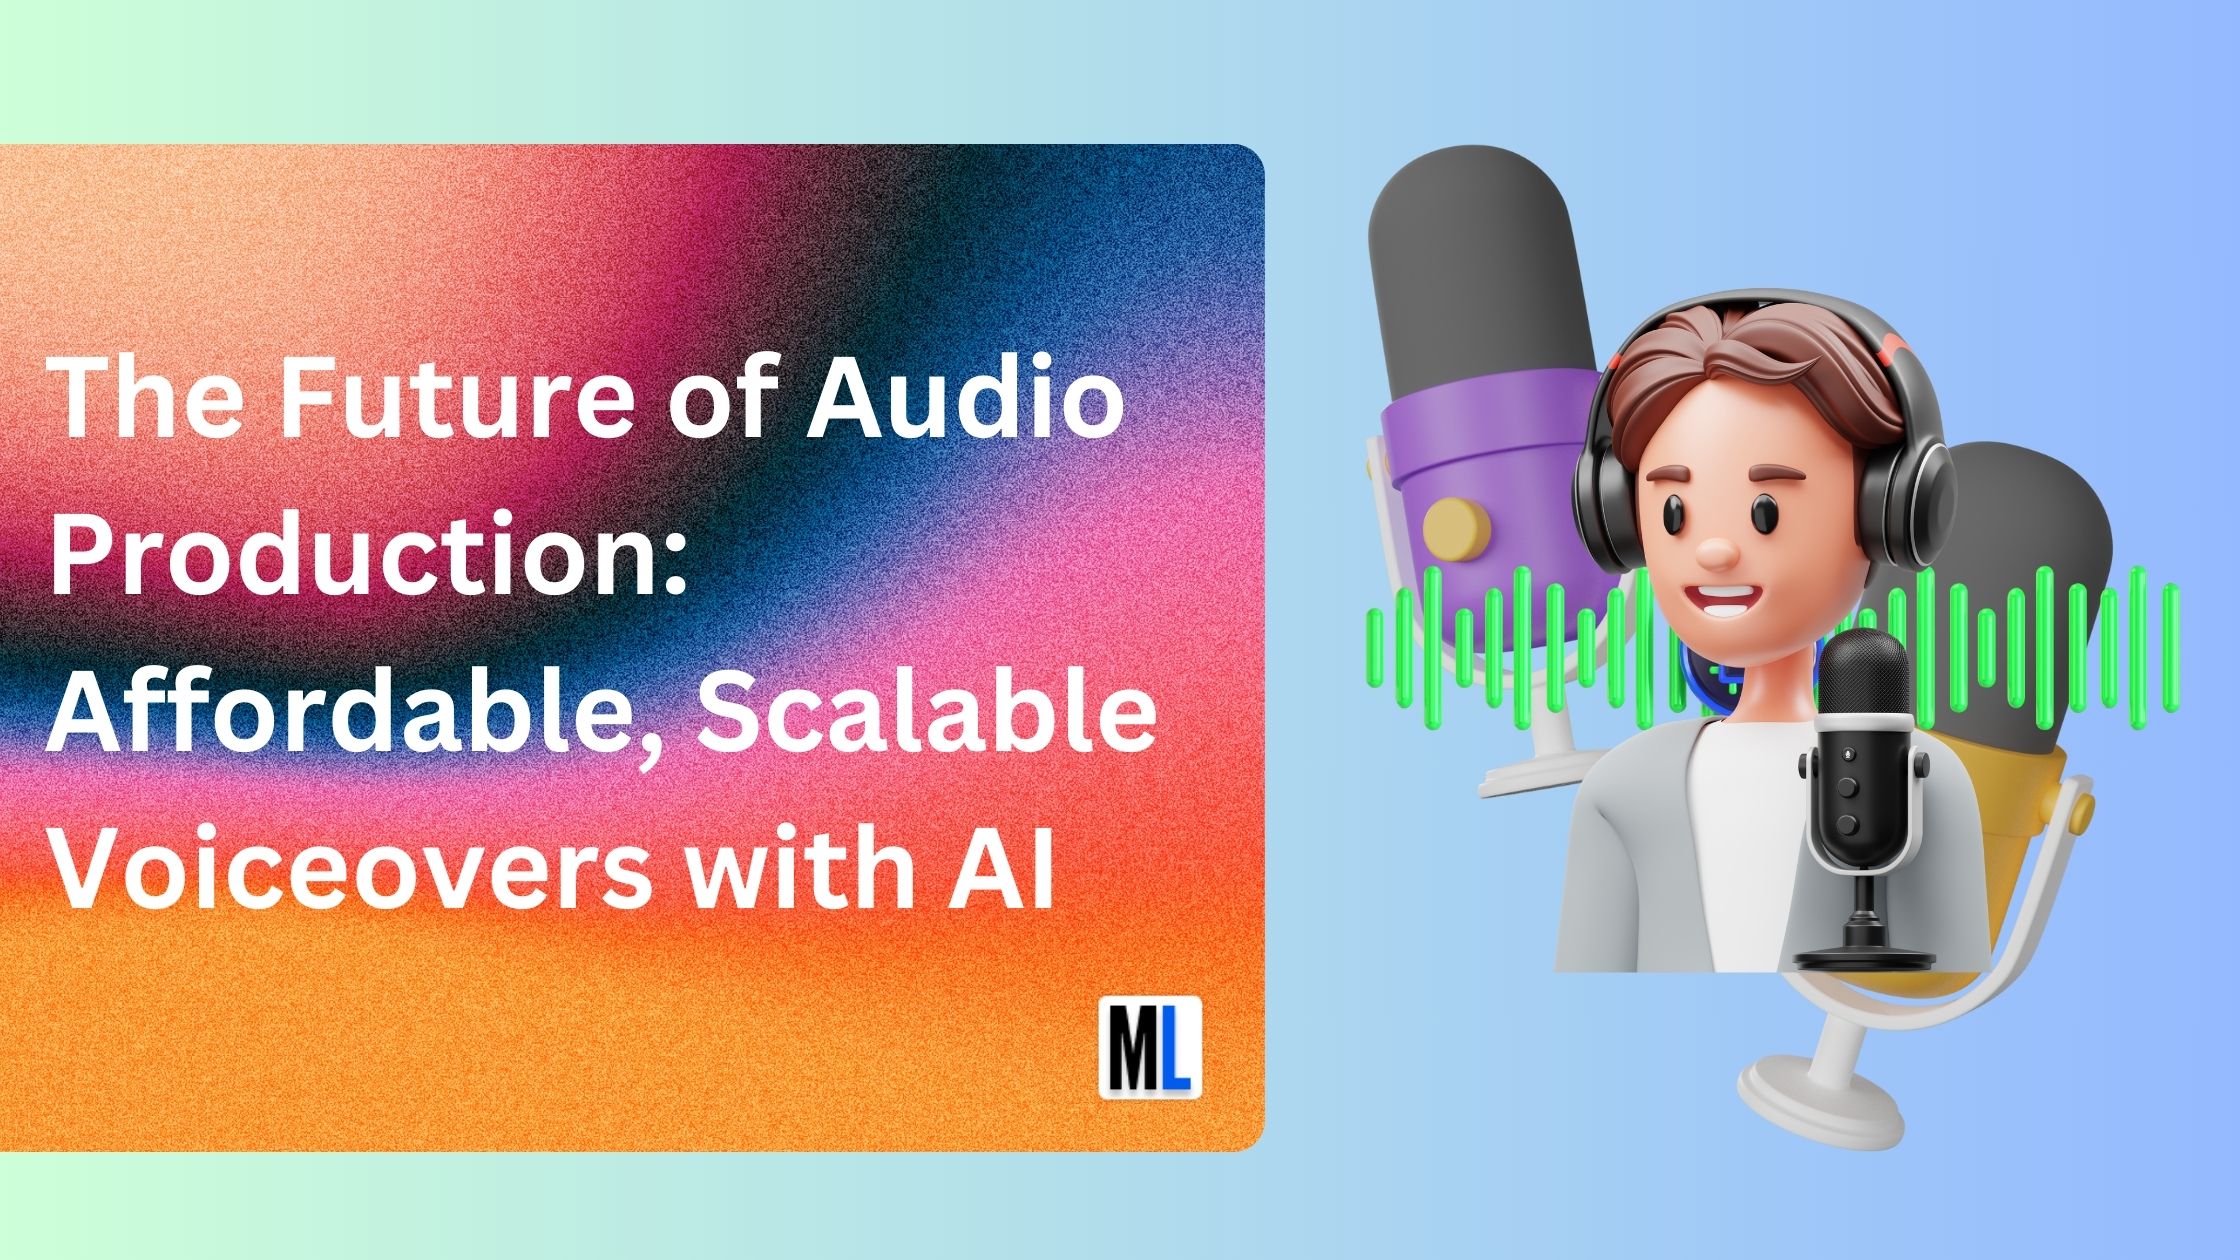 The Future of Audio Production: Affordable, Scalable Voiceovers with AI